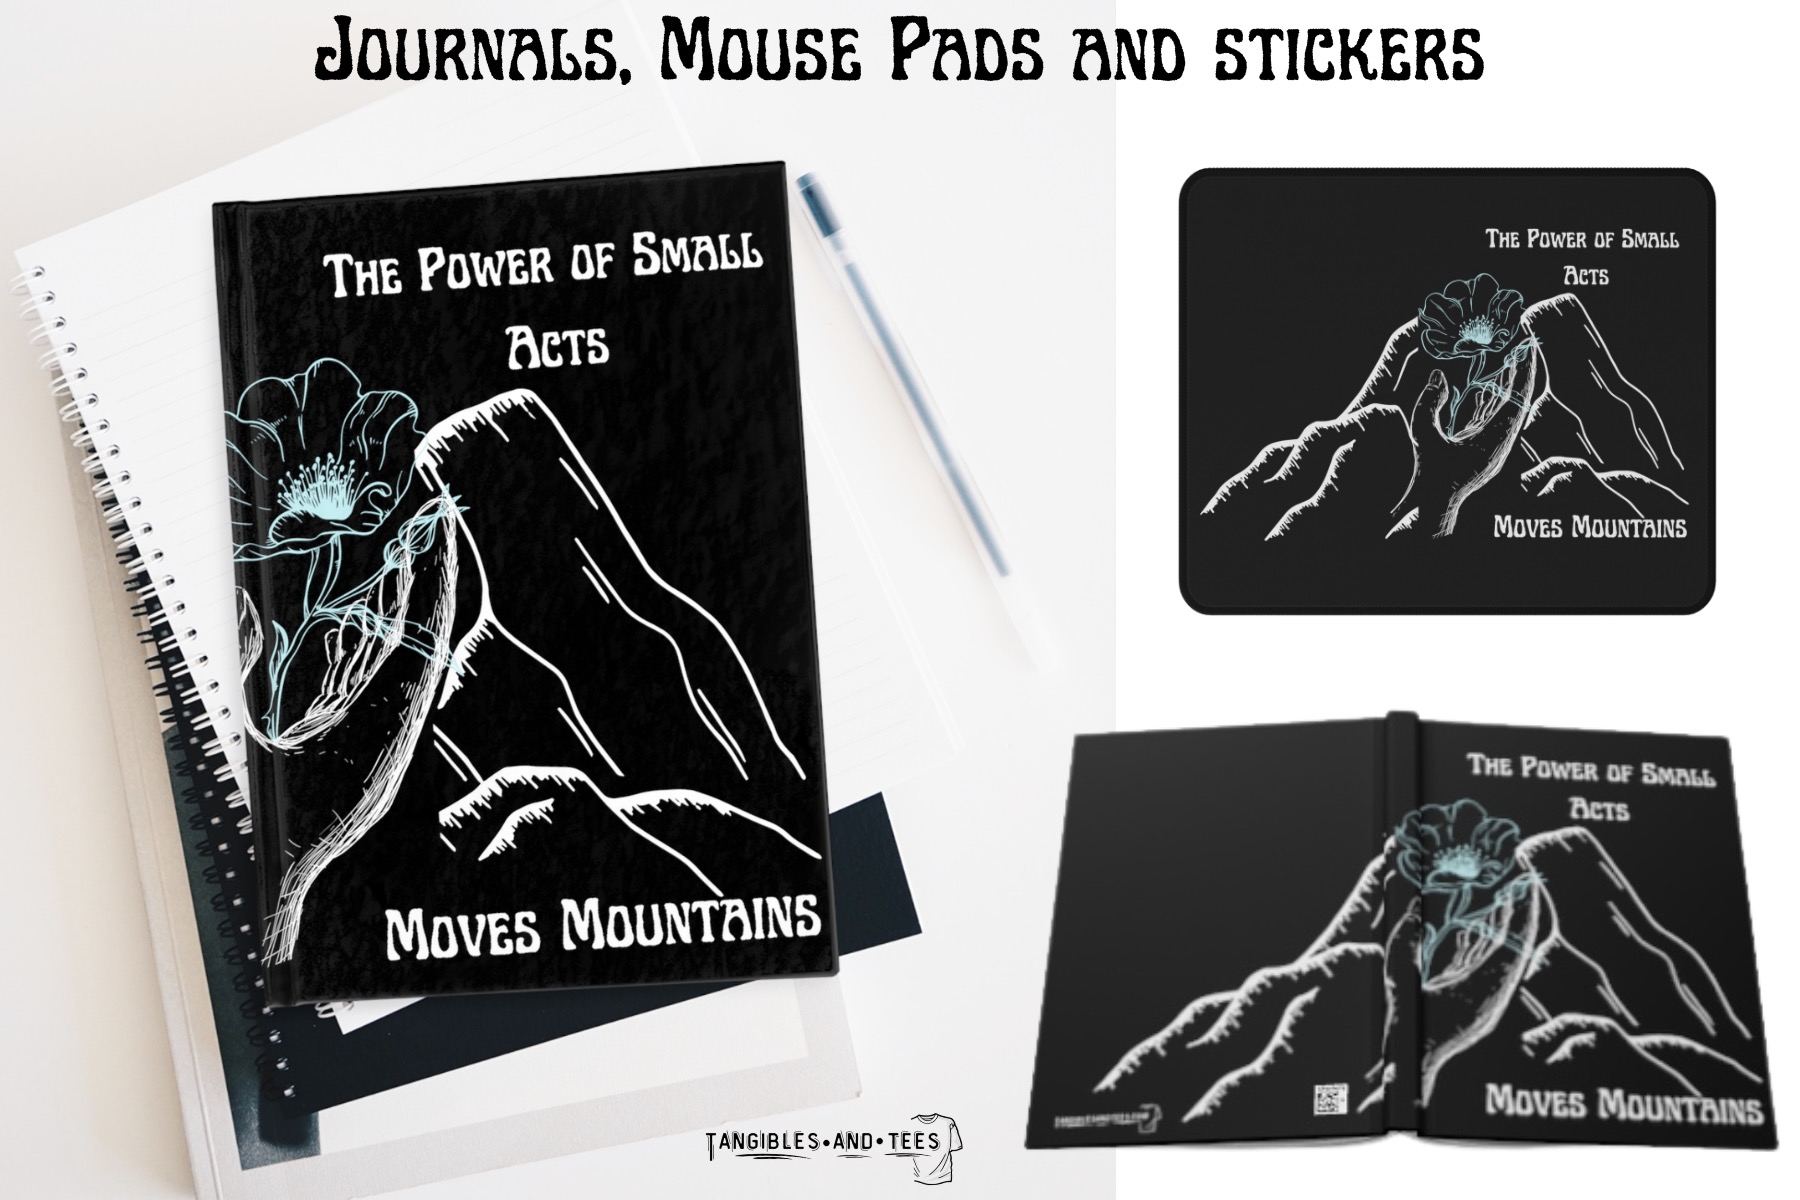 18-Journal-Mouse Pads-Stickers-Small Acts 1_18_11zon